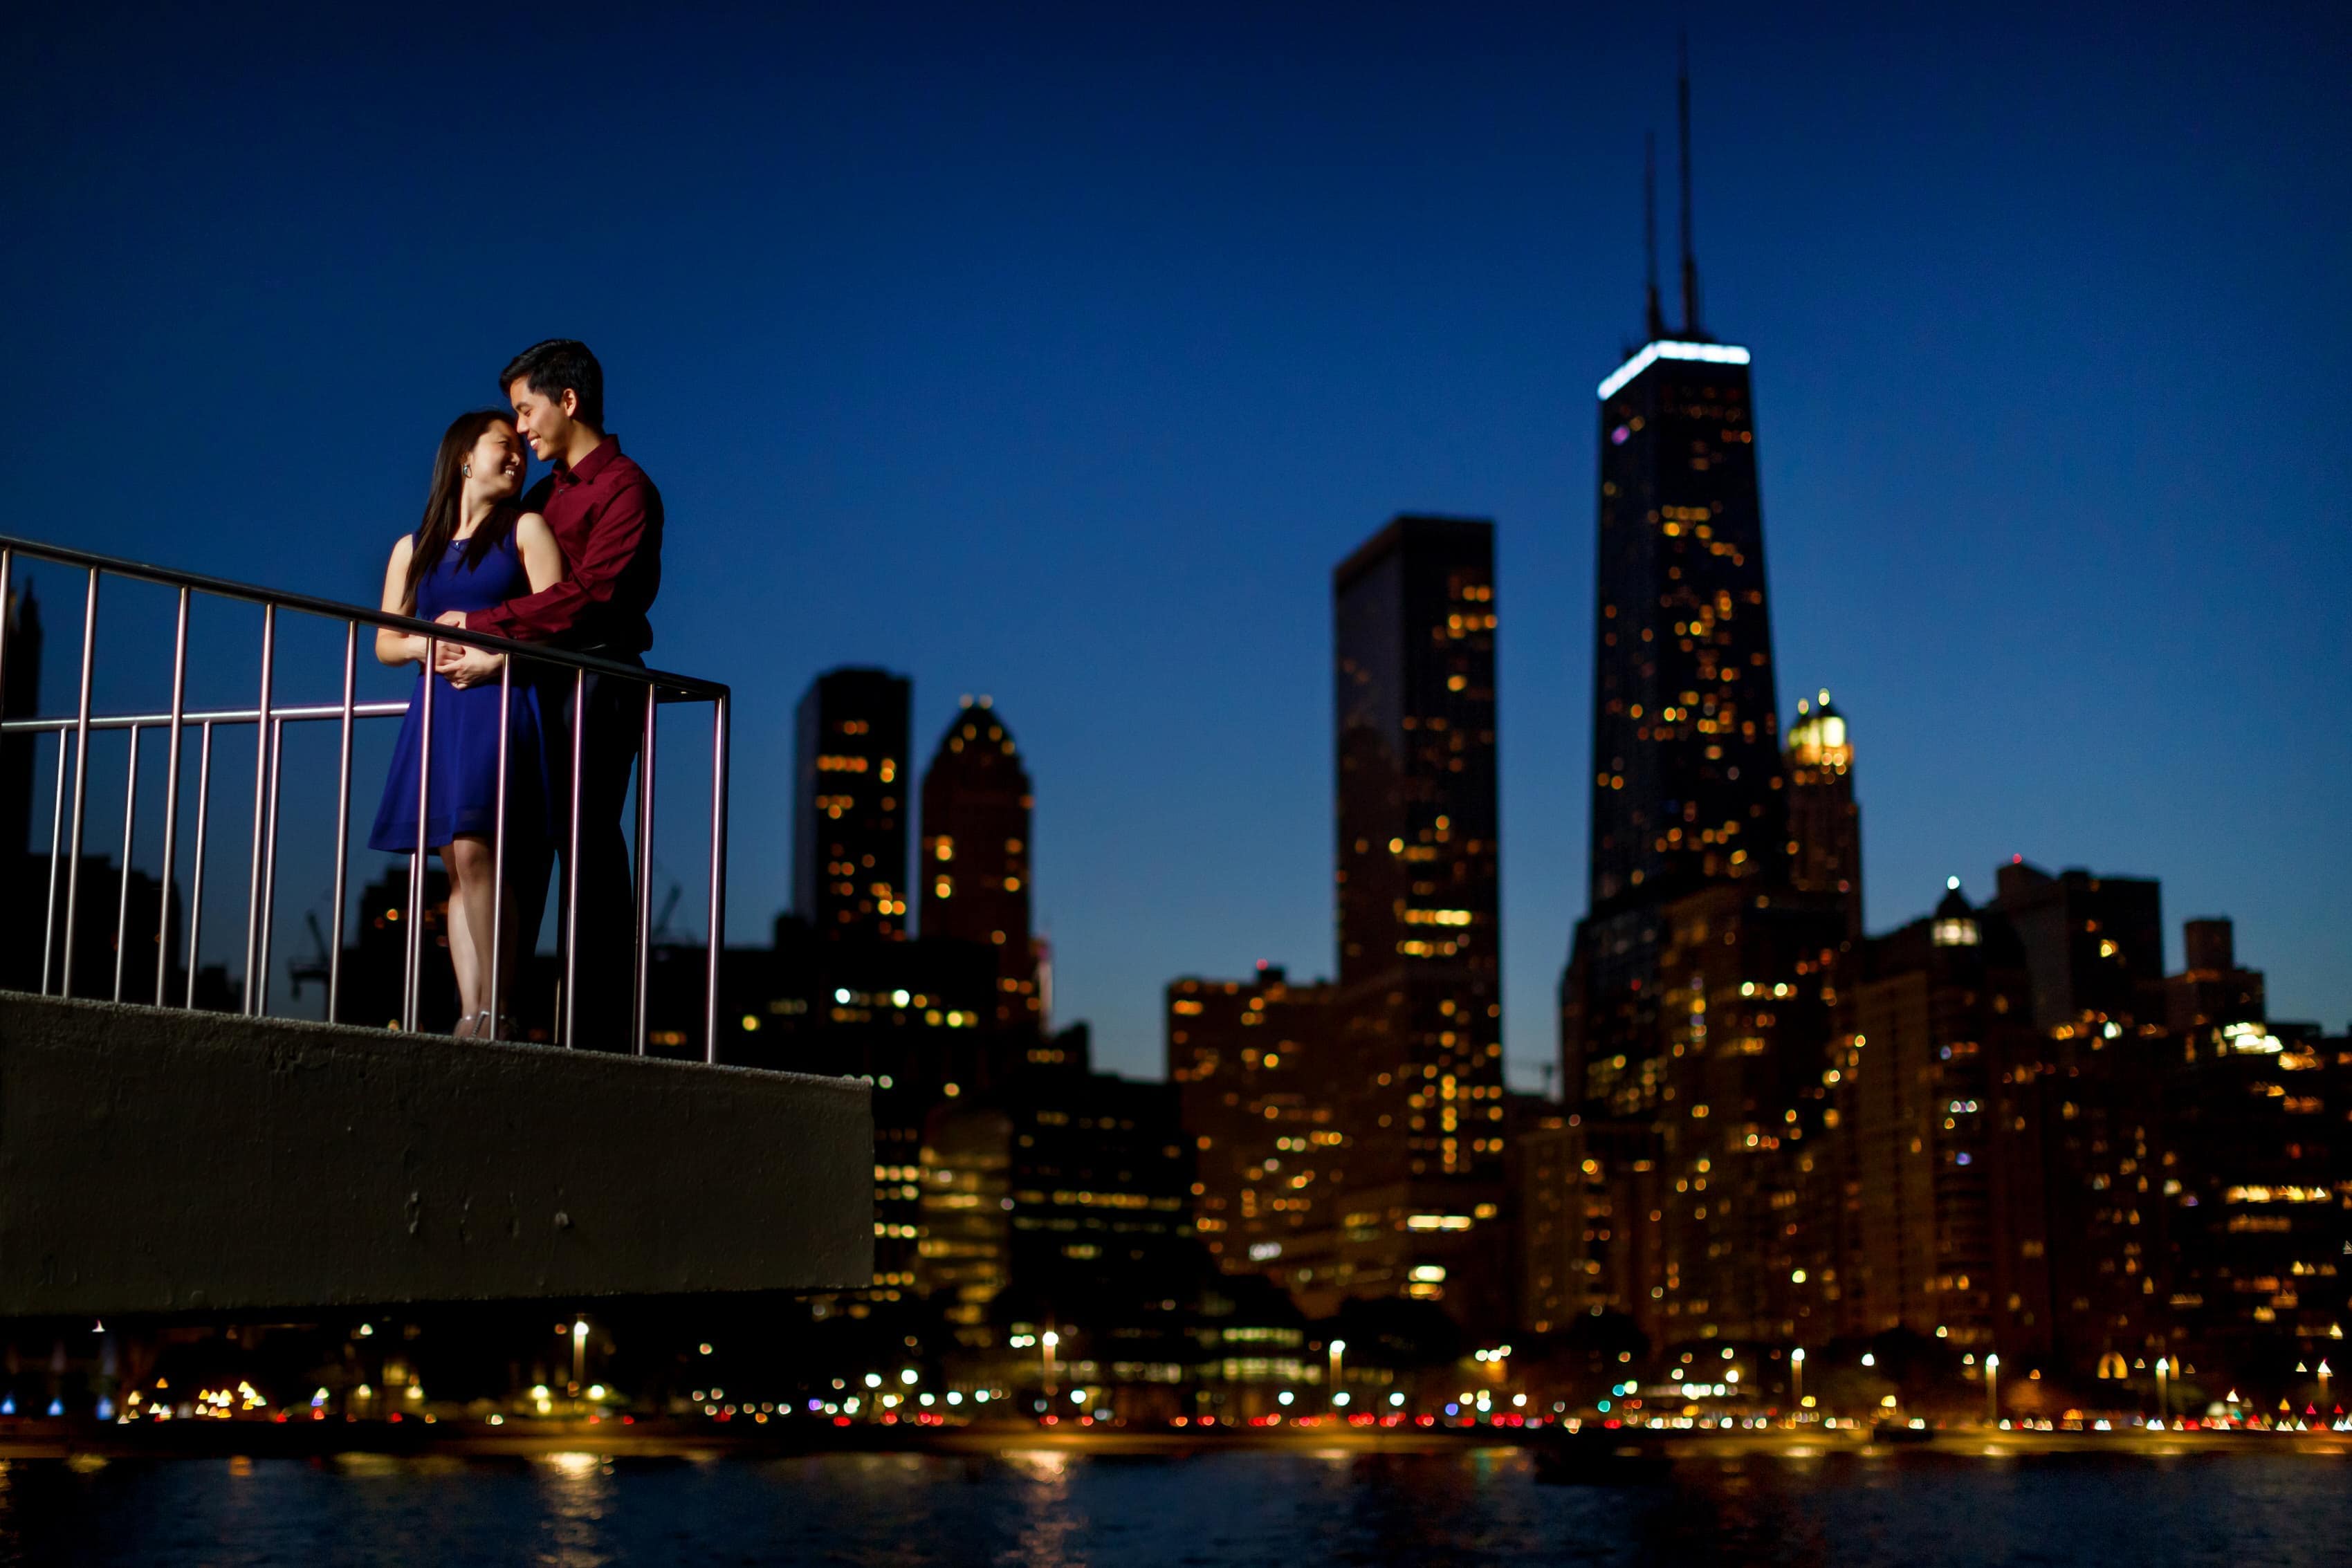 13_Best-Chicago-Engagement-Locations